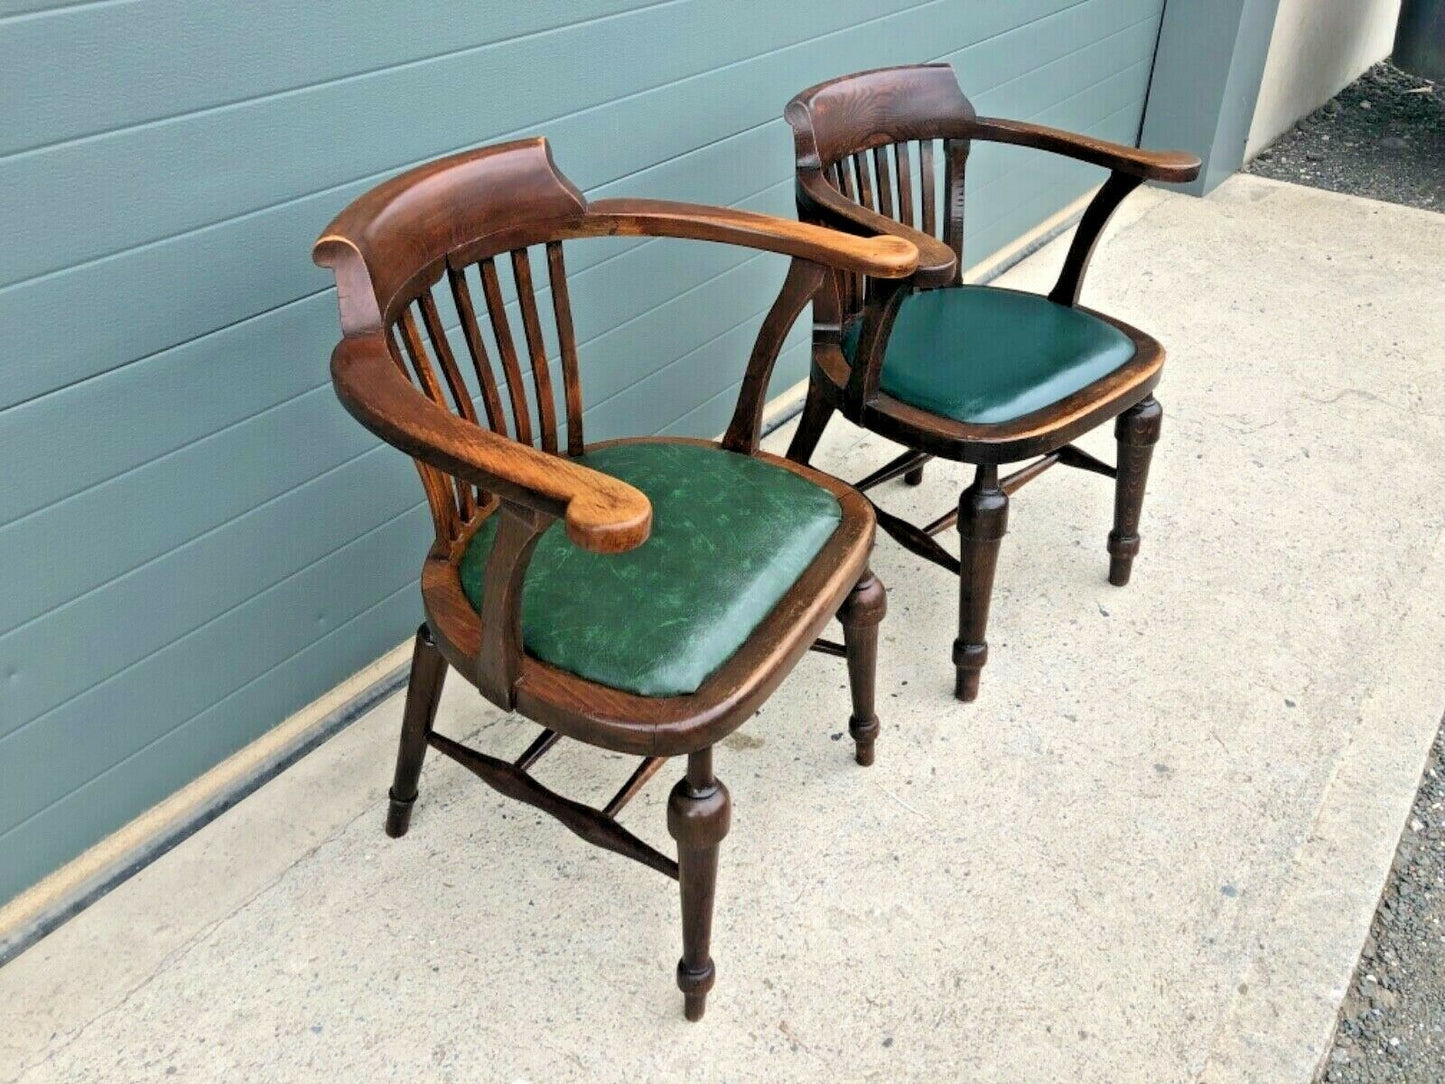 089.....Two Similar Handsome Vintage Desk Chairs